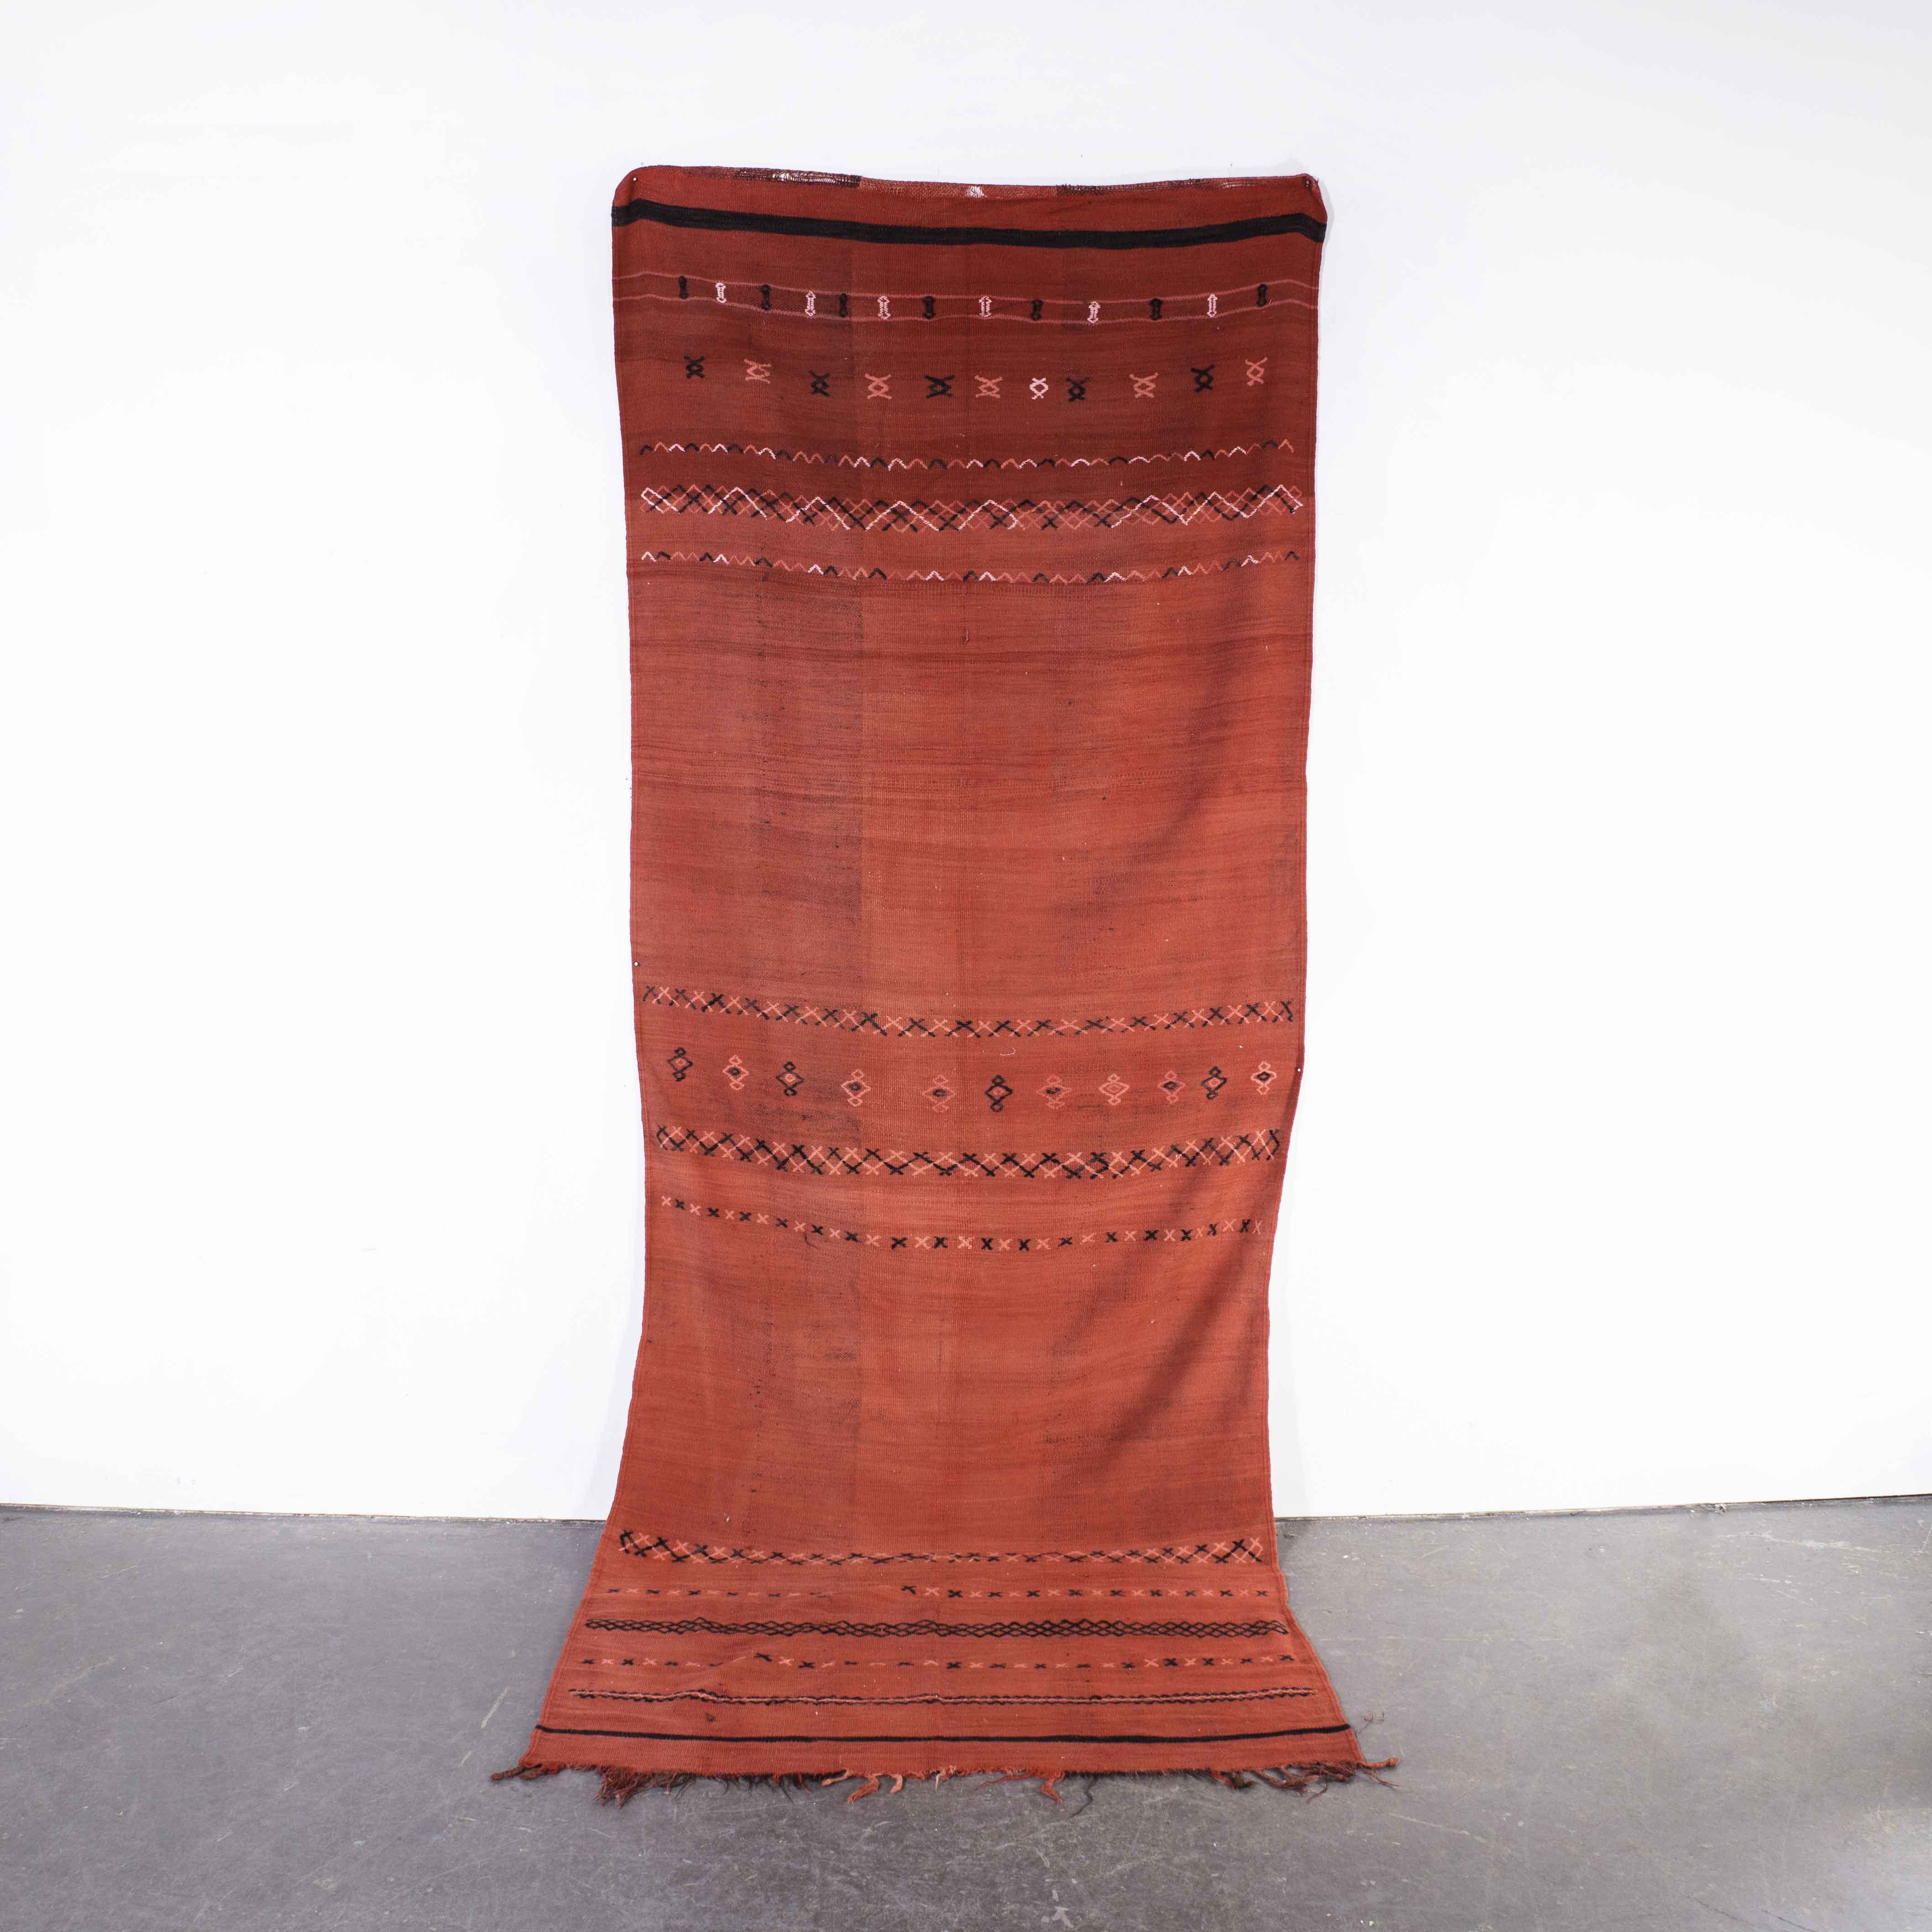 Vintage Berber Washed Red Solid Hanbel Rug
Vintage Berber Washed Red Solid Hanbel Rug. These are flat-woven rugs (Hanbel in Arabic) which are light in weight due to the lack of pile. They are often used on floors in hotter countries as they are easy